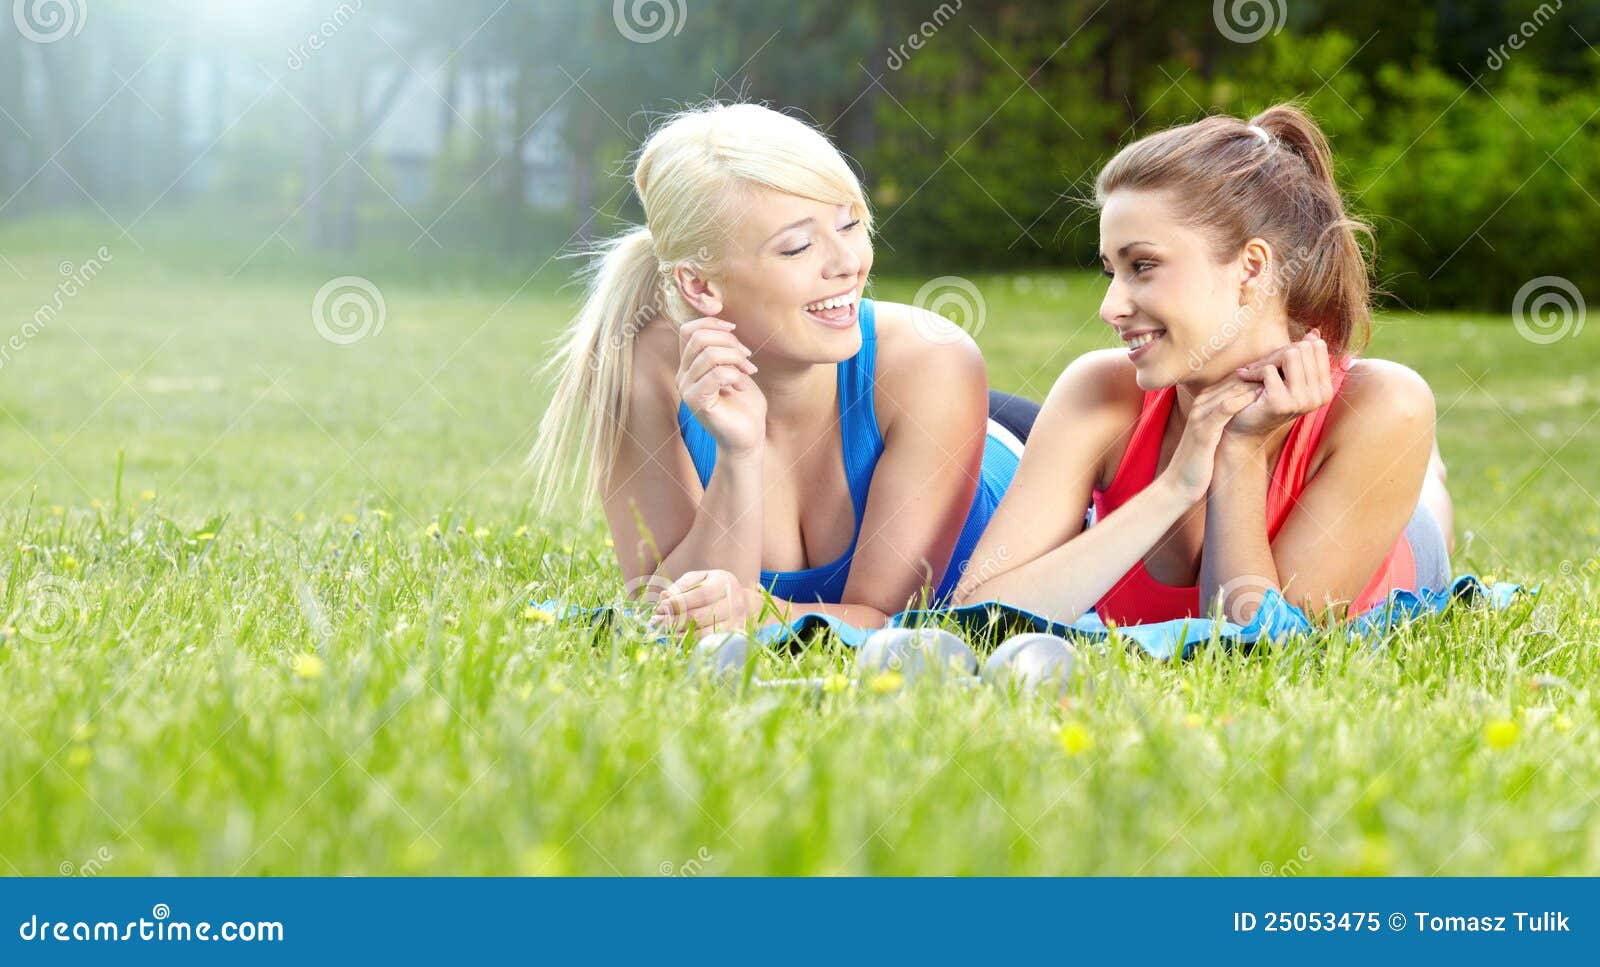 Two Fitness Girls Outdoor Stock Image Image Of Care 25053475